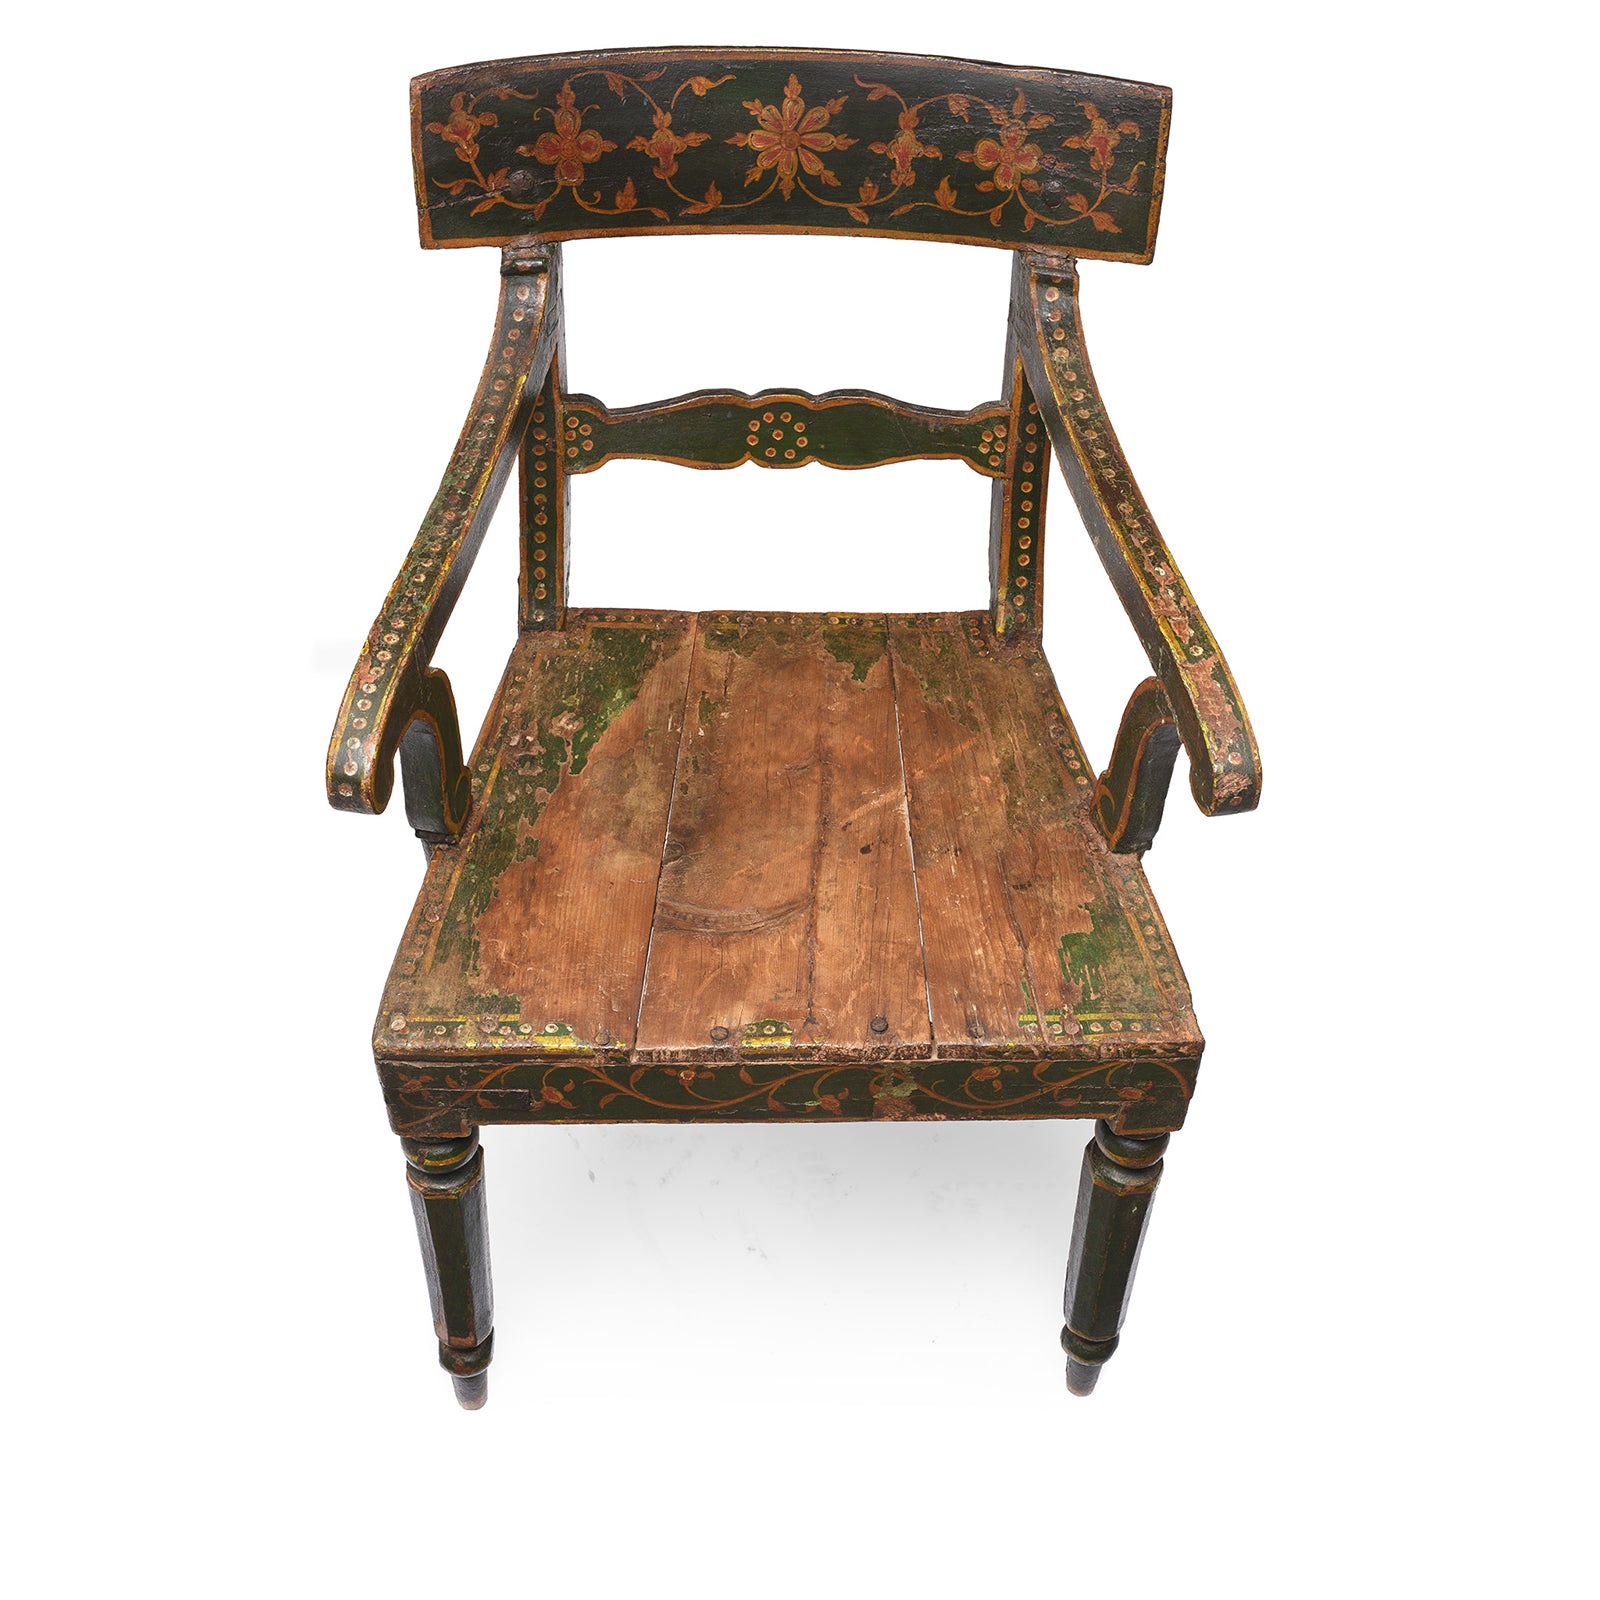 Indian Polychrome Chair With Original Painting From Bikaner | Indigo Antiques